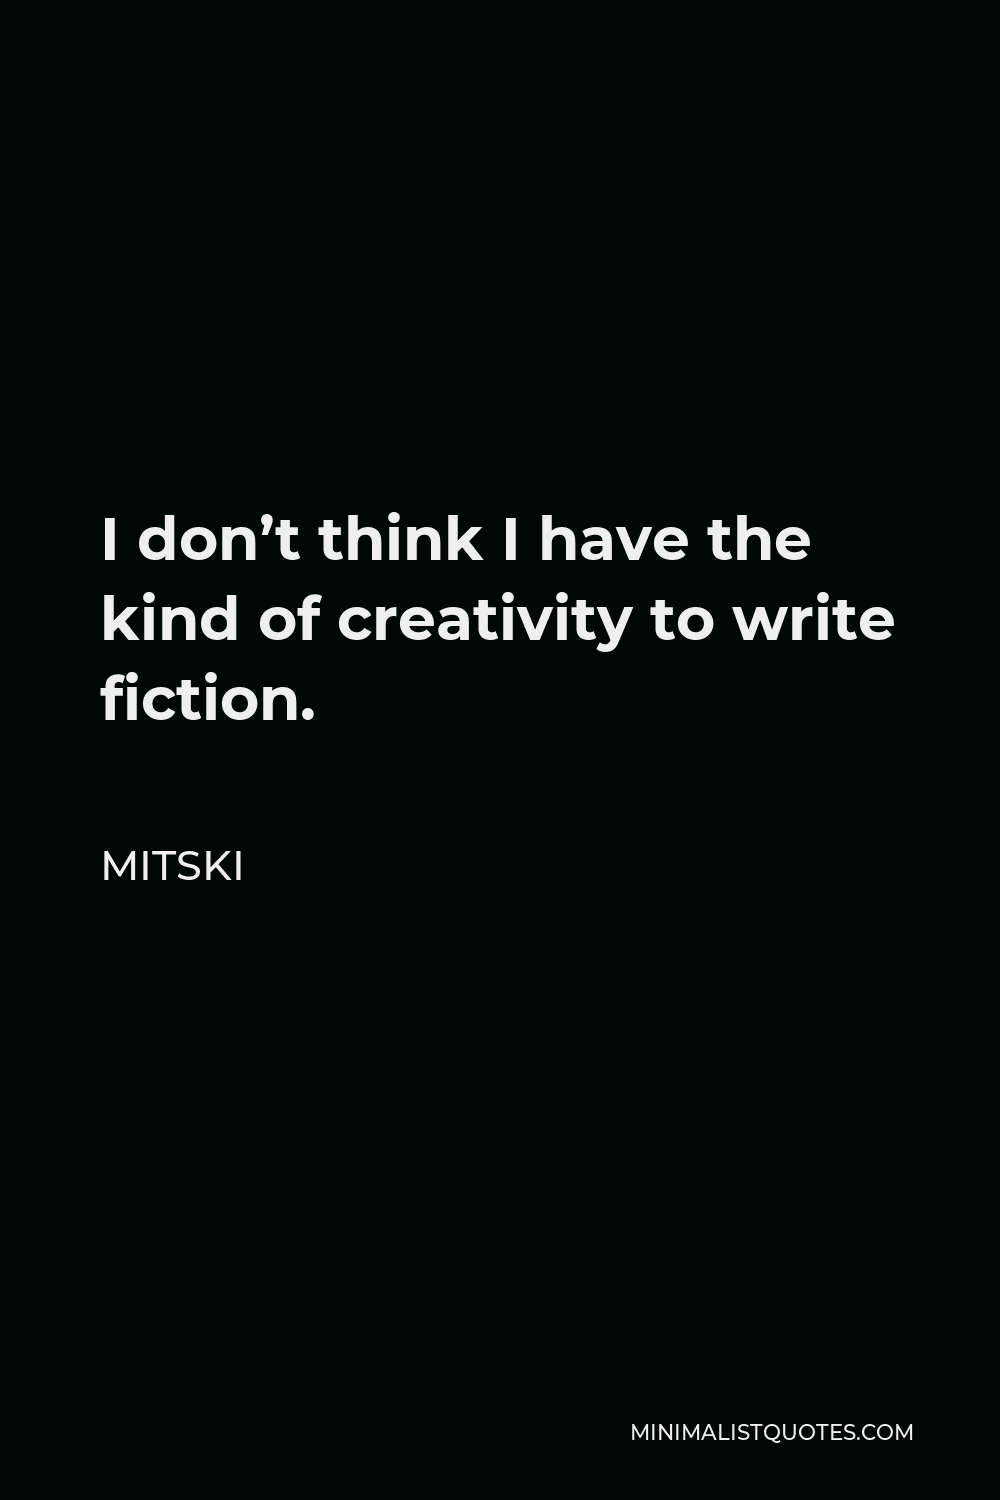 Mitski Quote - I don’t think I have the kind of creativity to write fiction.